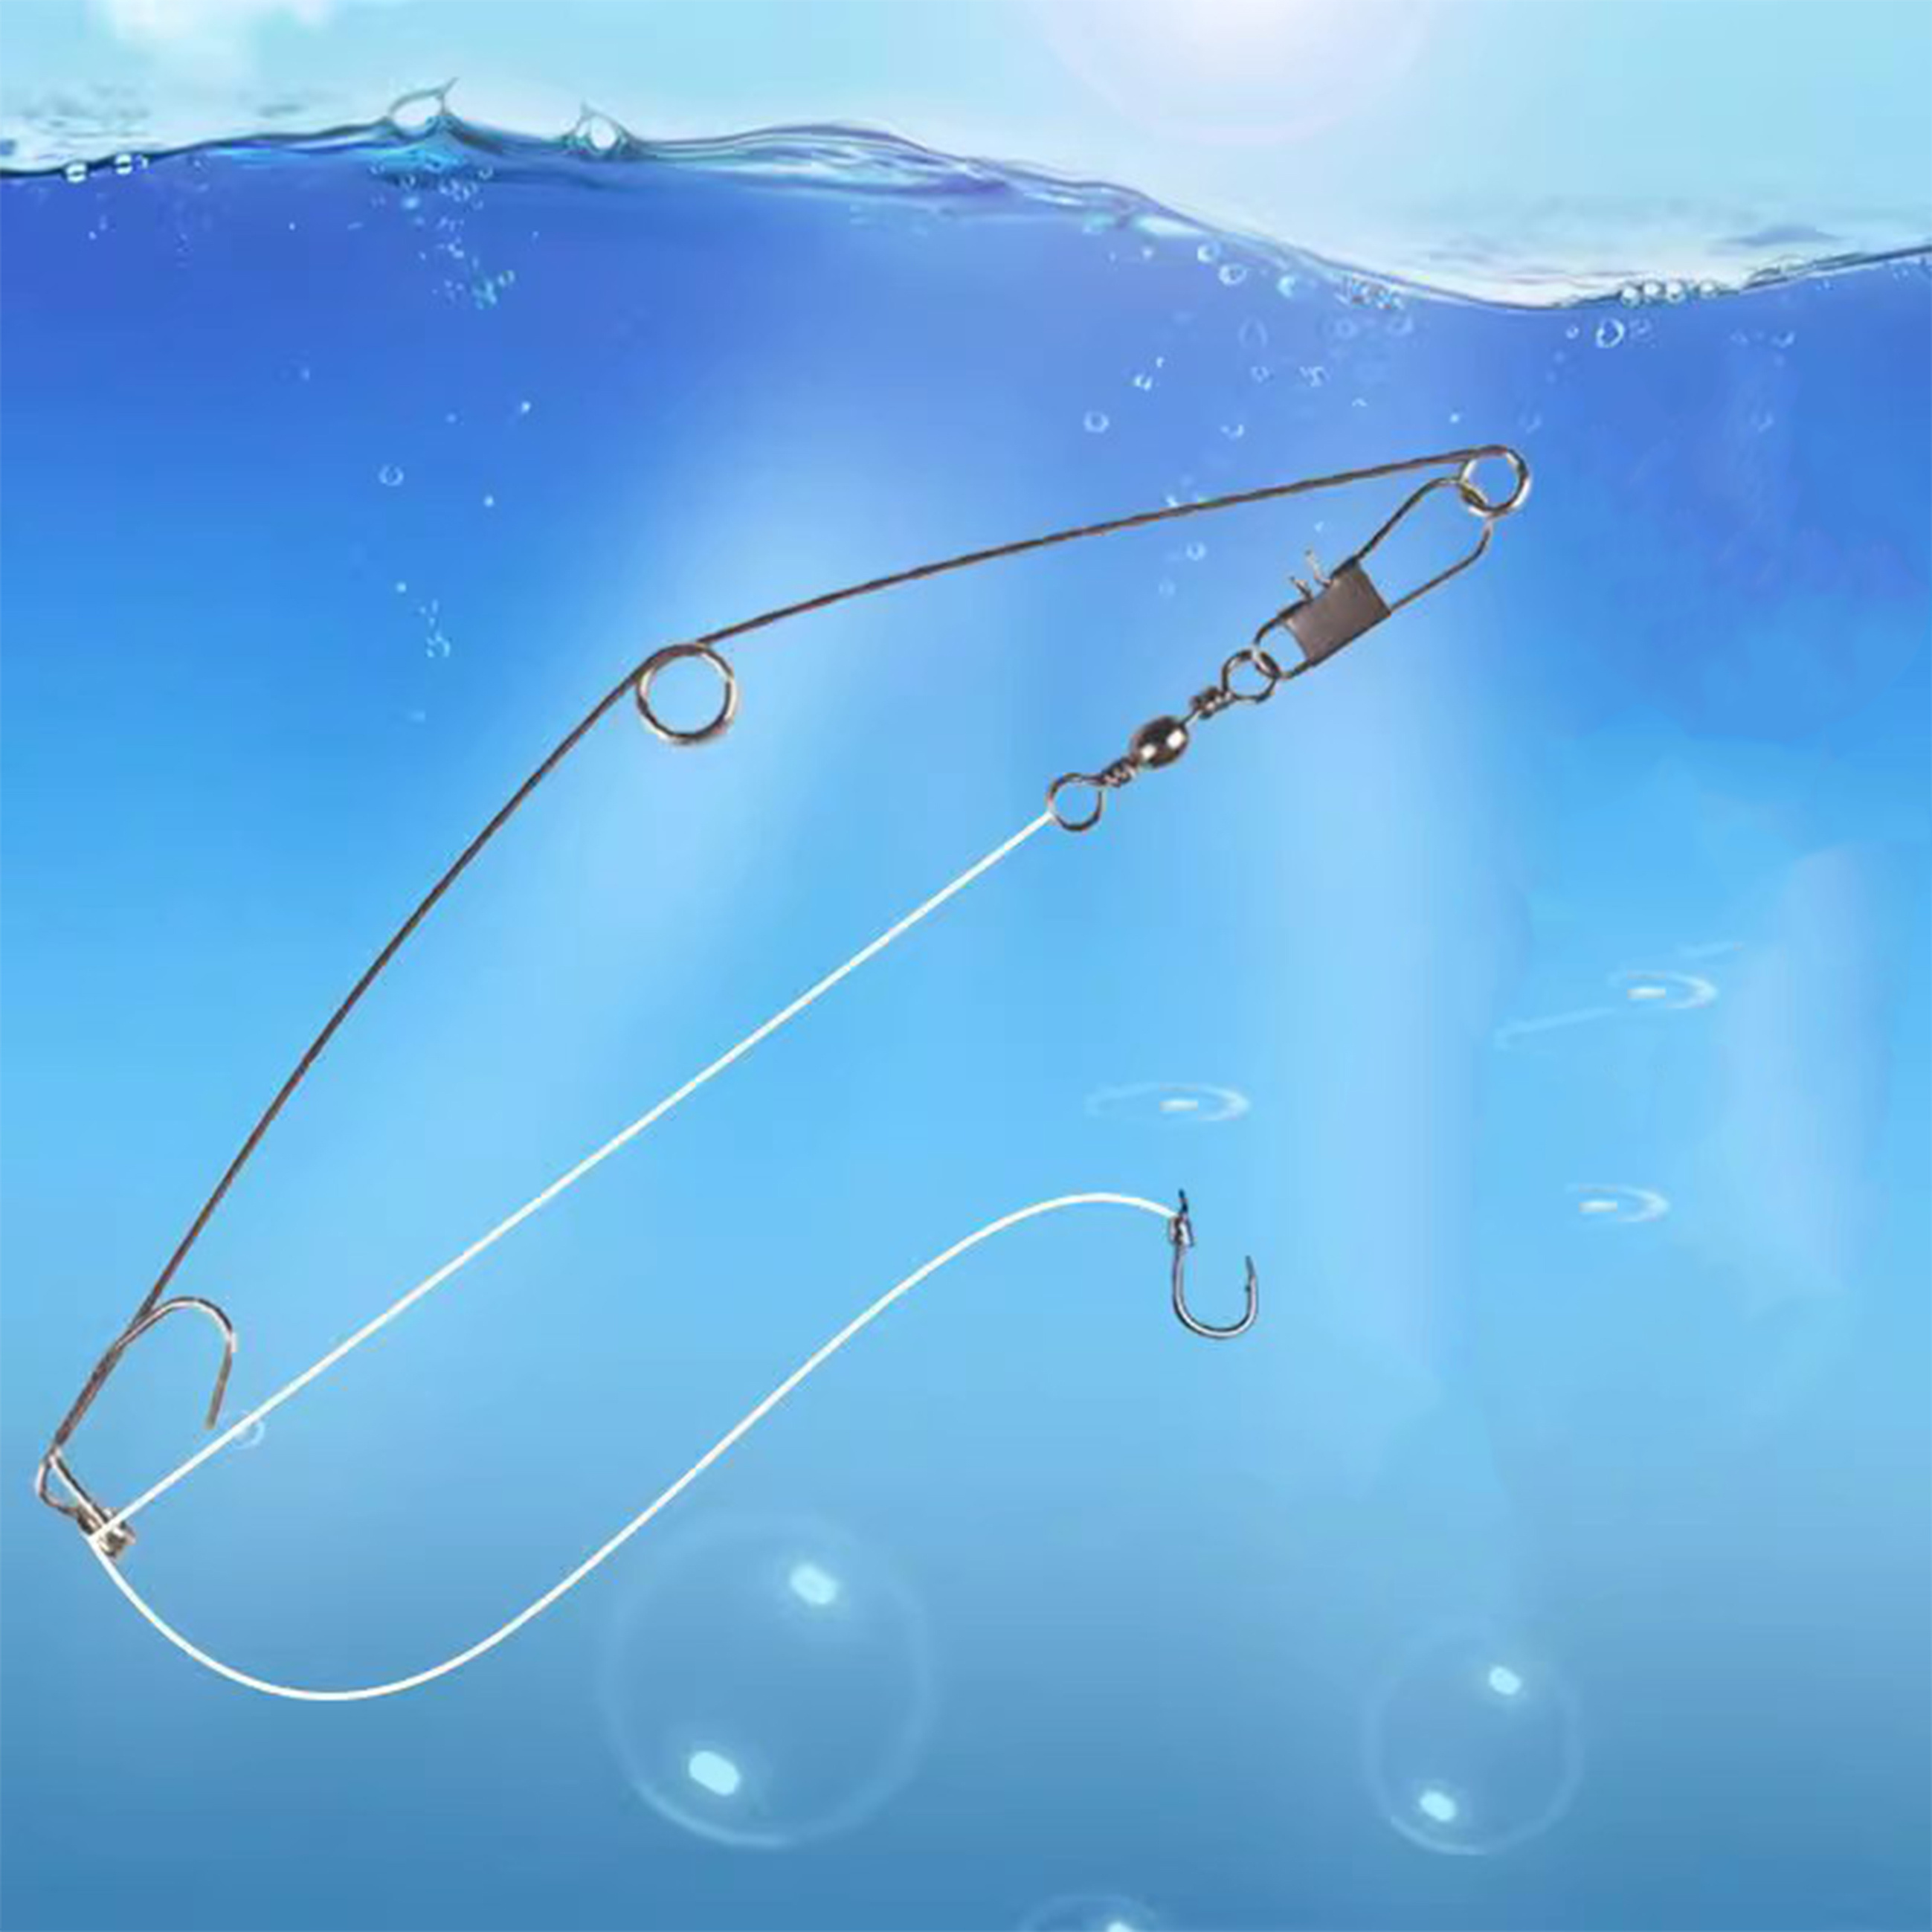 Effortlessly Catch Fish Automatic Spring loaded Fishing Hook